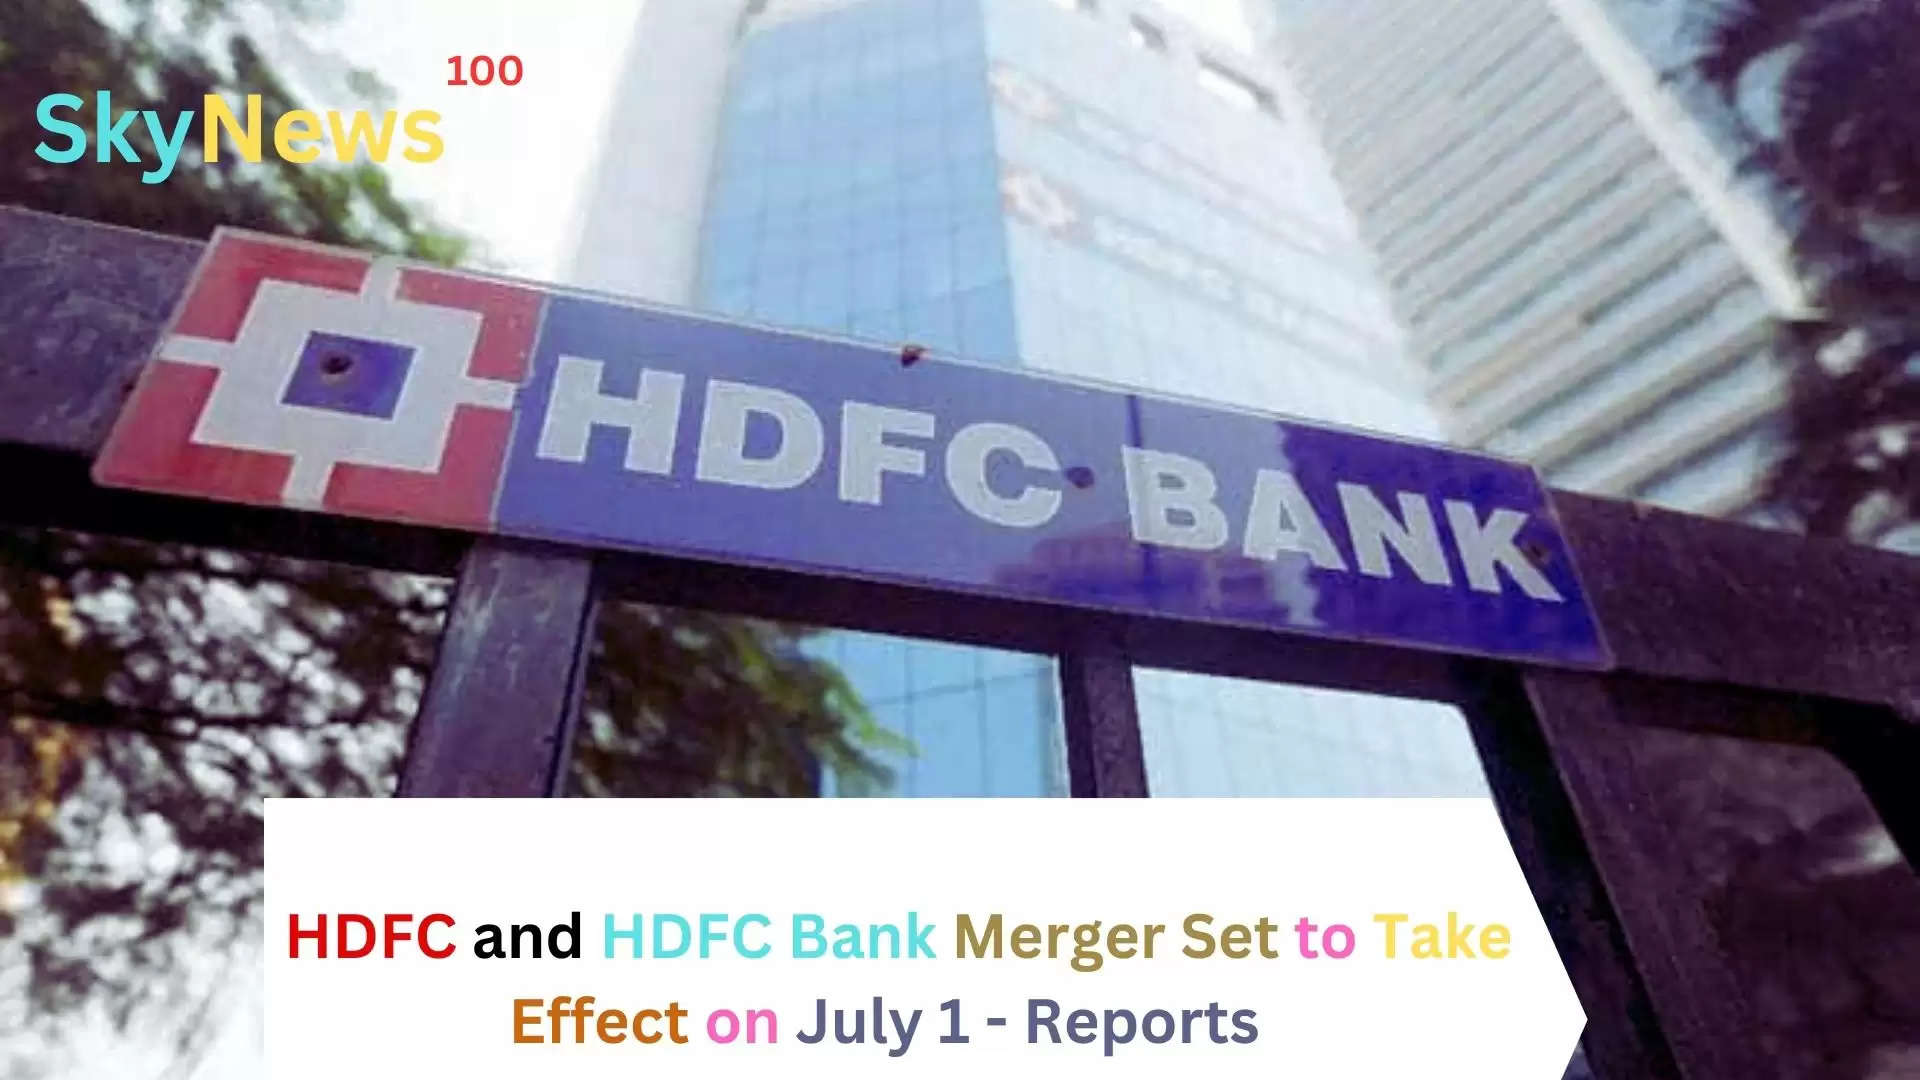 HDFC and HDFC Bank Merger Set to Take Effect on July 1 - Reports"